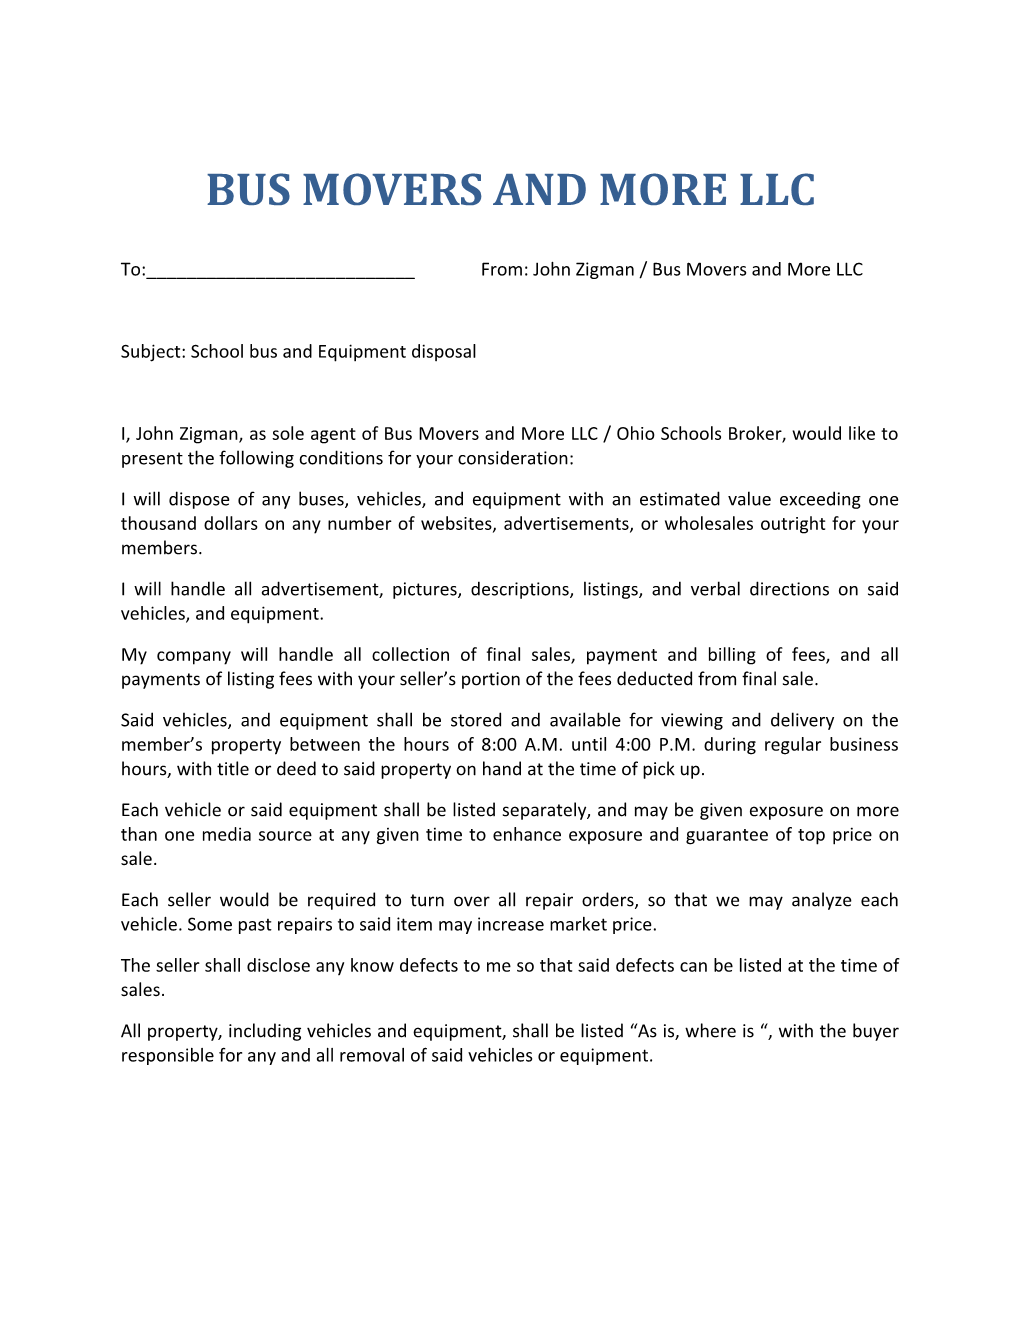 Bus Movers and More Llc